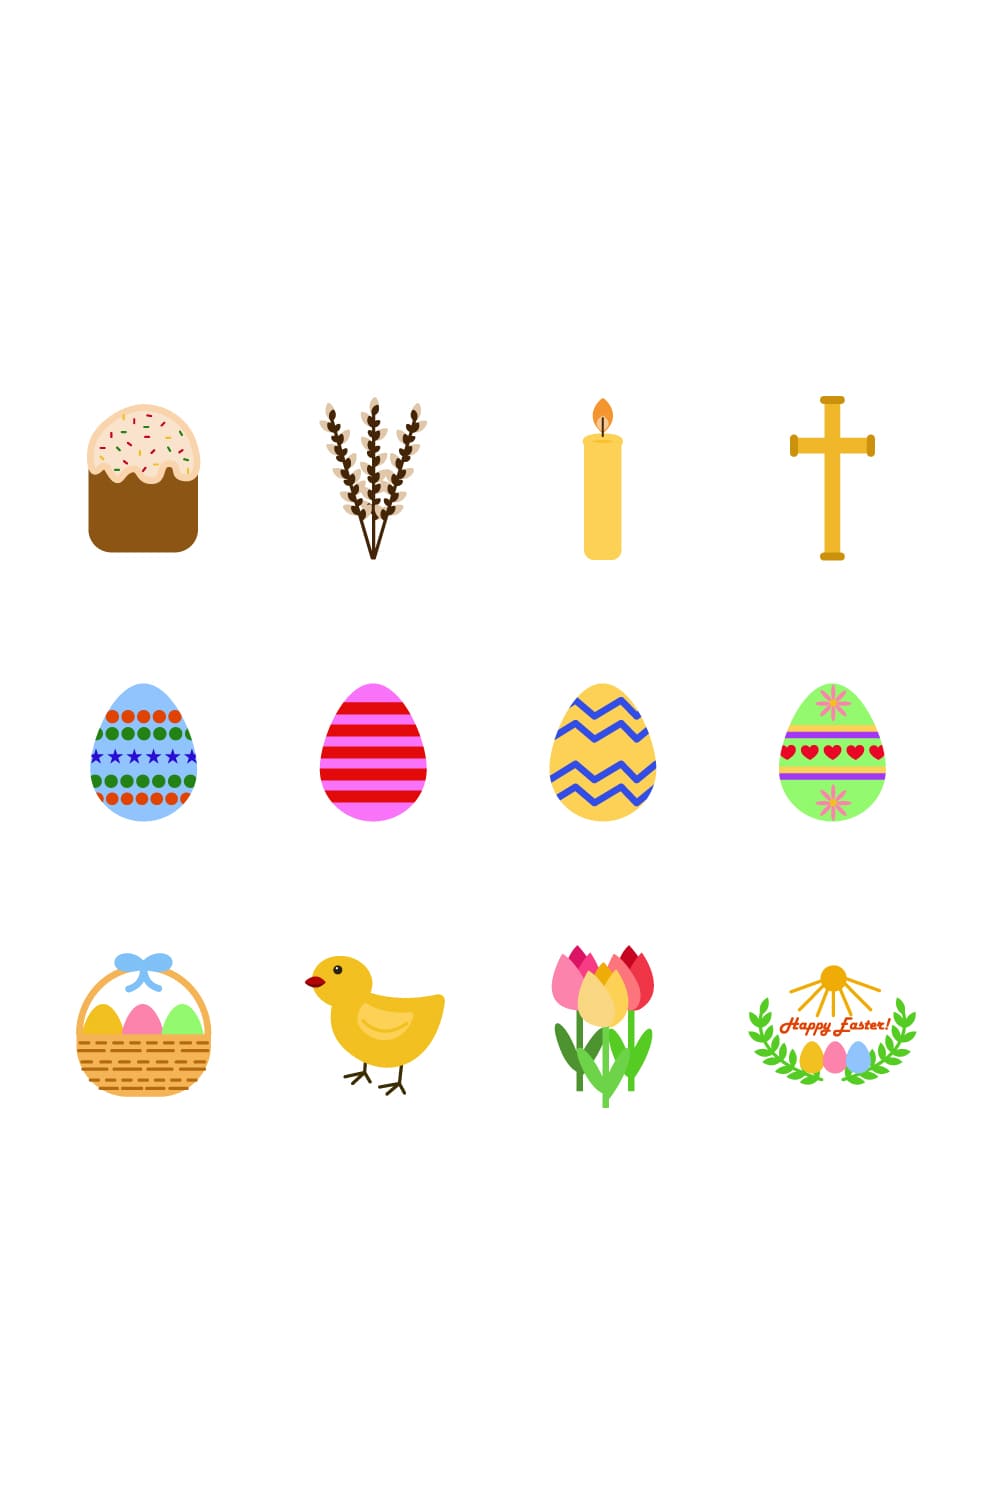 Happy Easter Icons Free Pinterest.